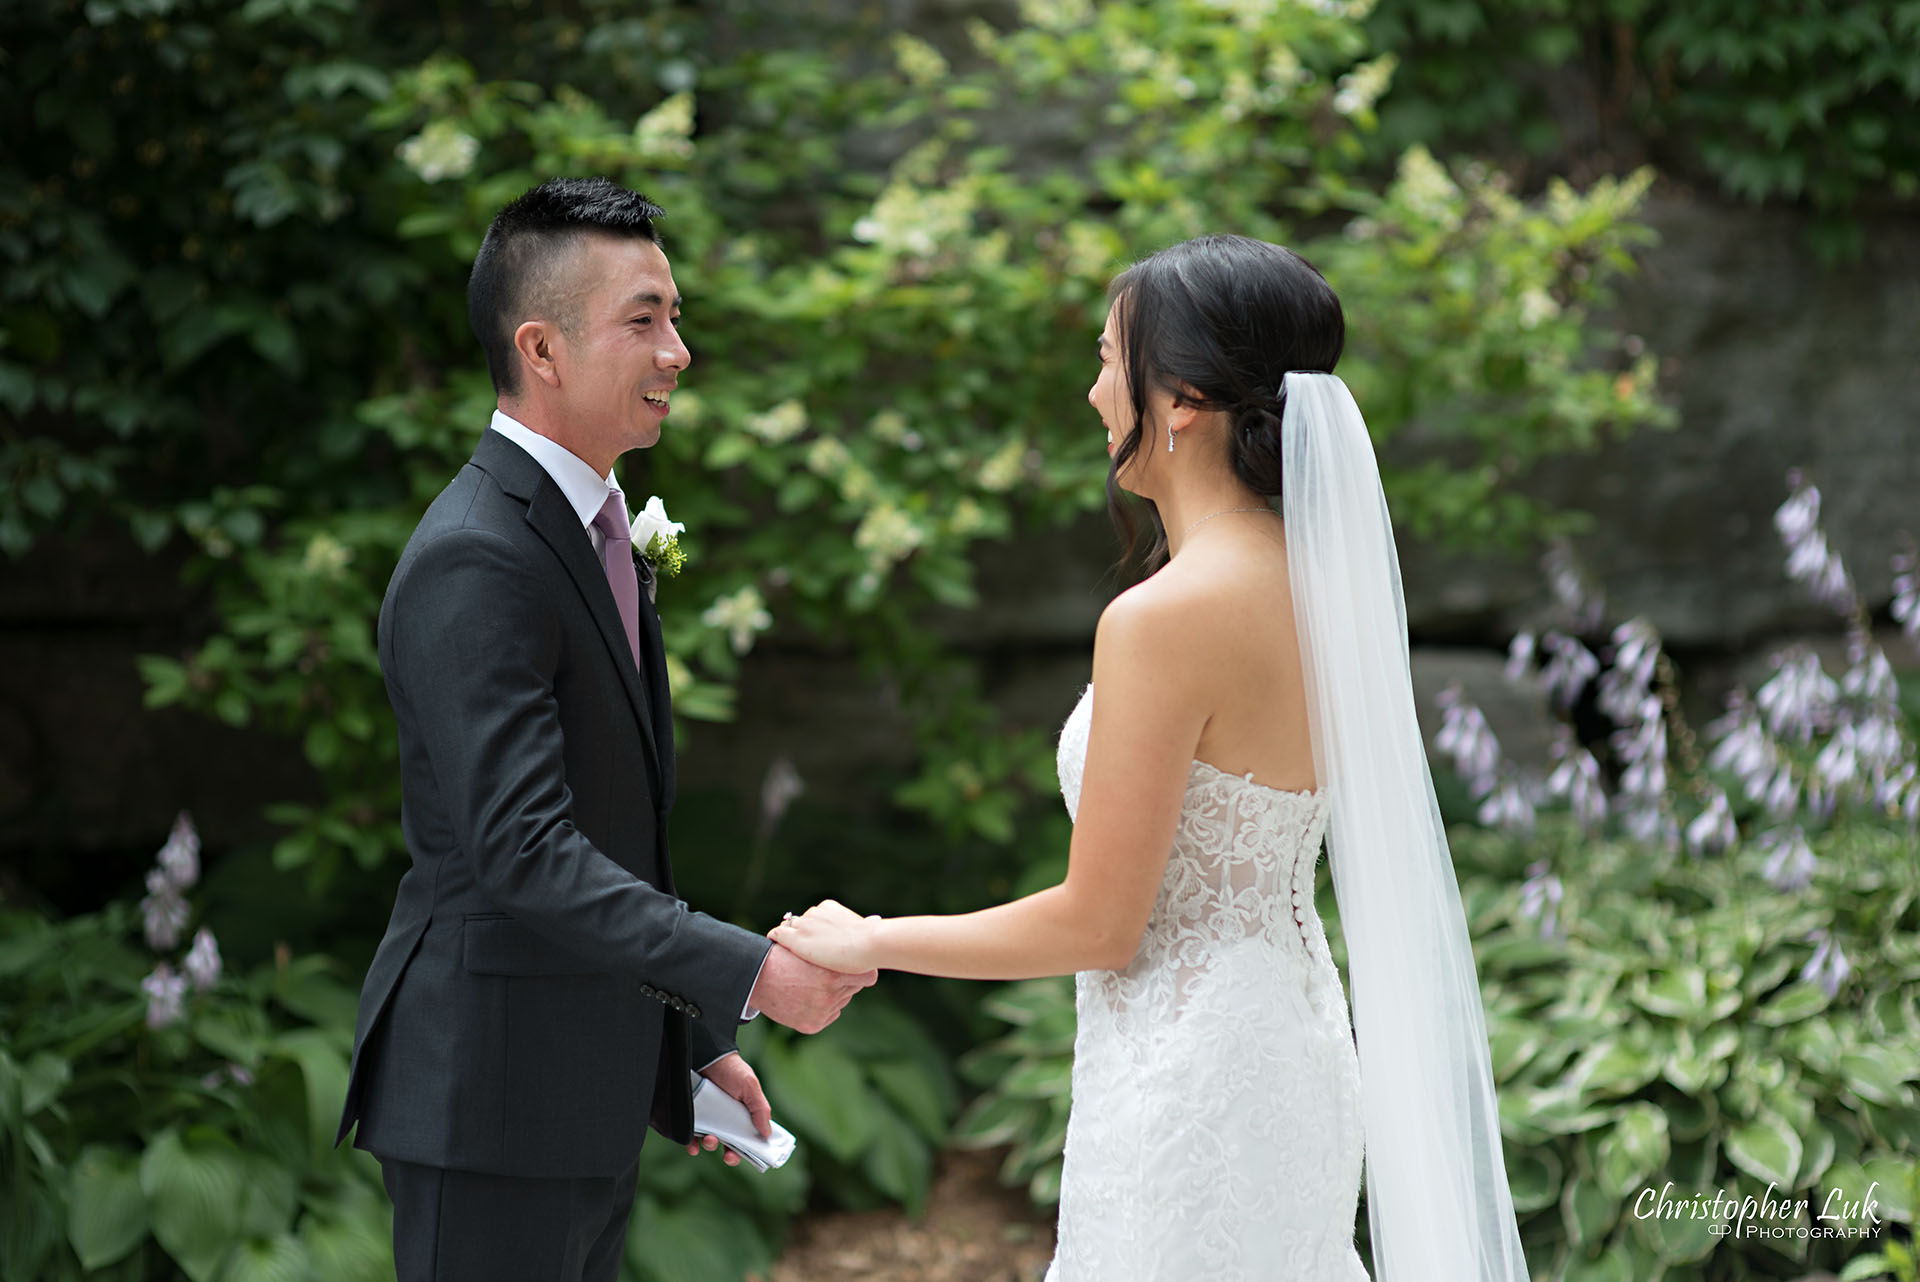 Toronto Wedding Photography Candid Natural Photojournalistic Organic First Look Reveal Bride Groom Holding Hands Together 